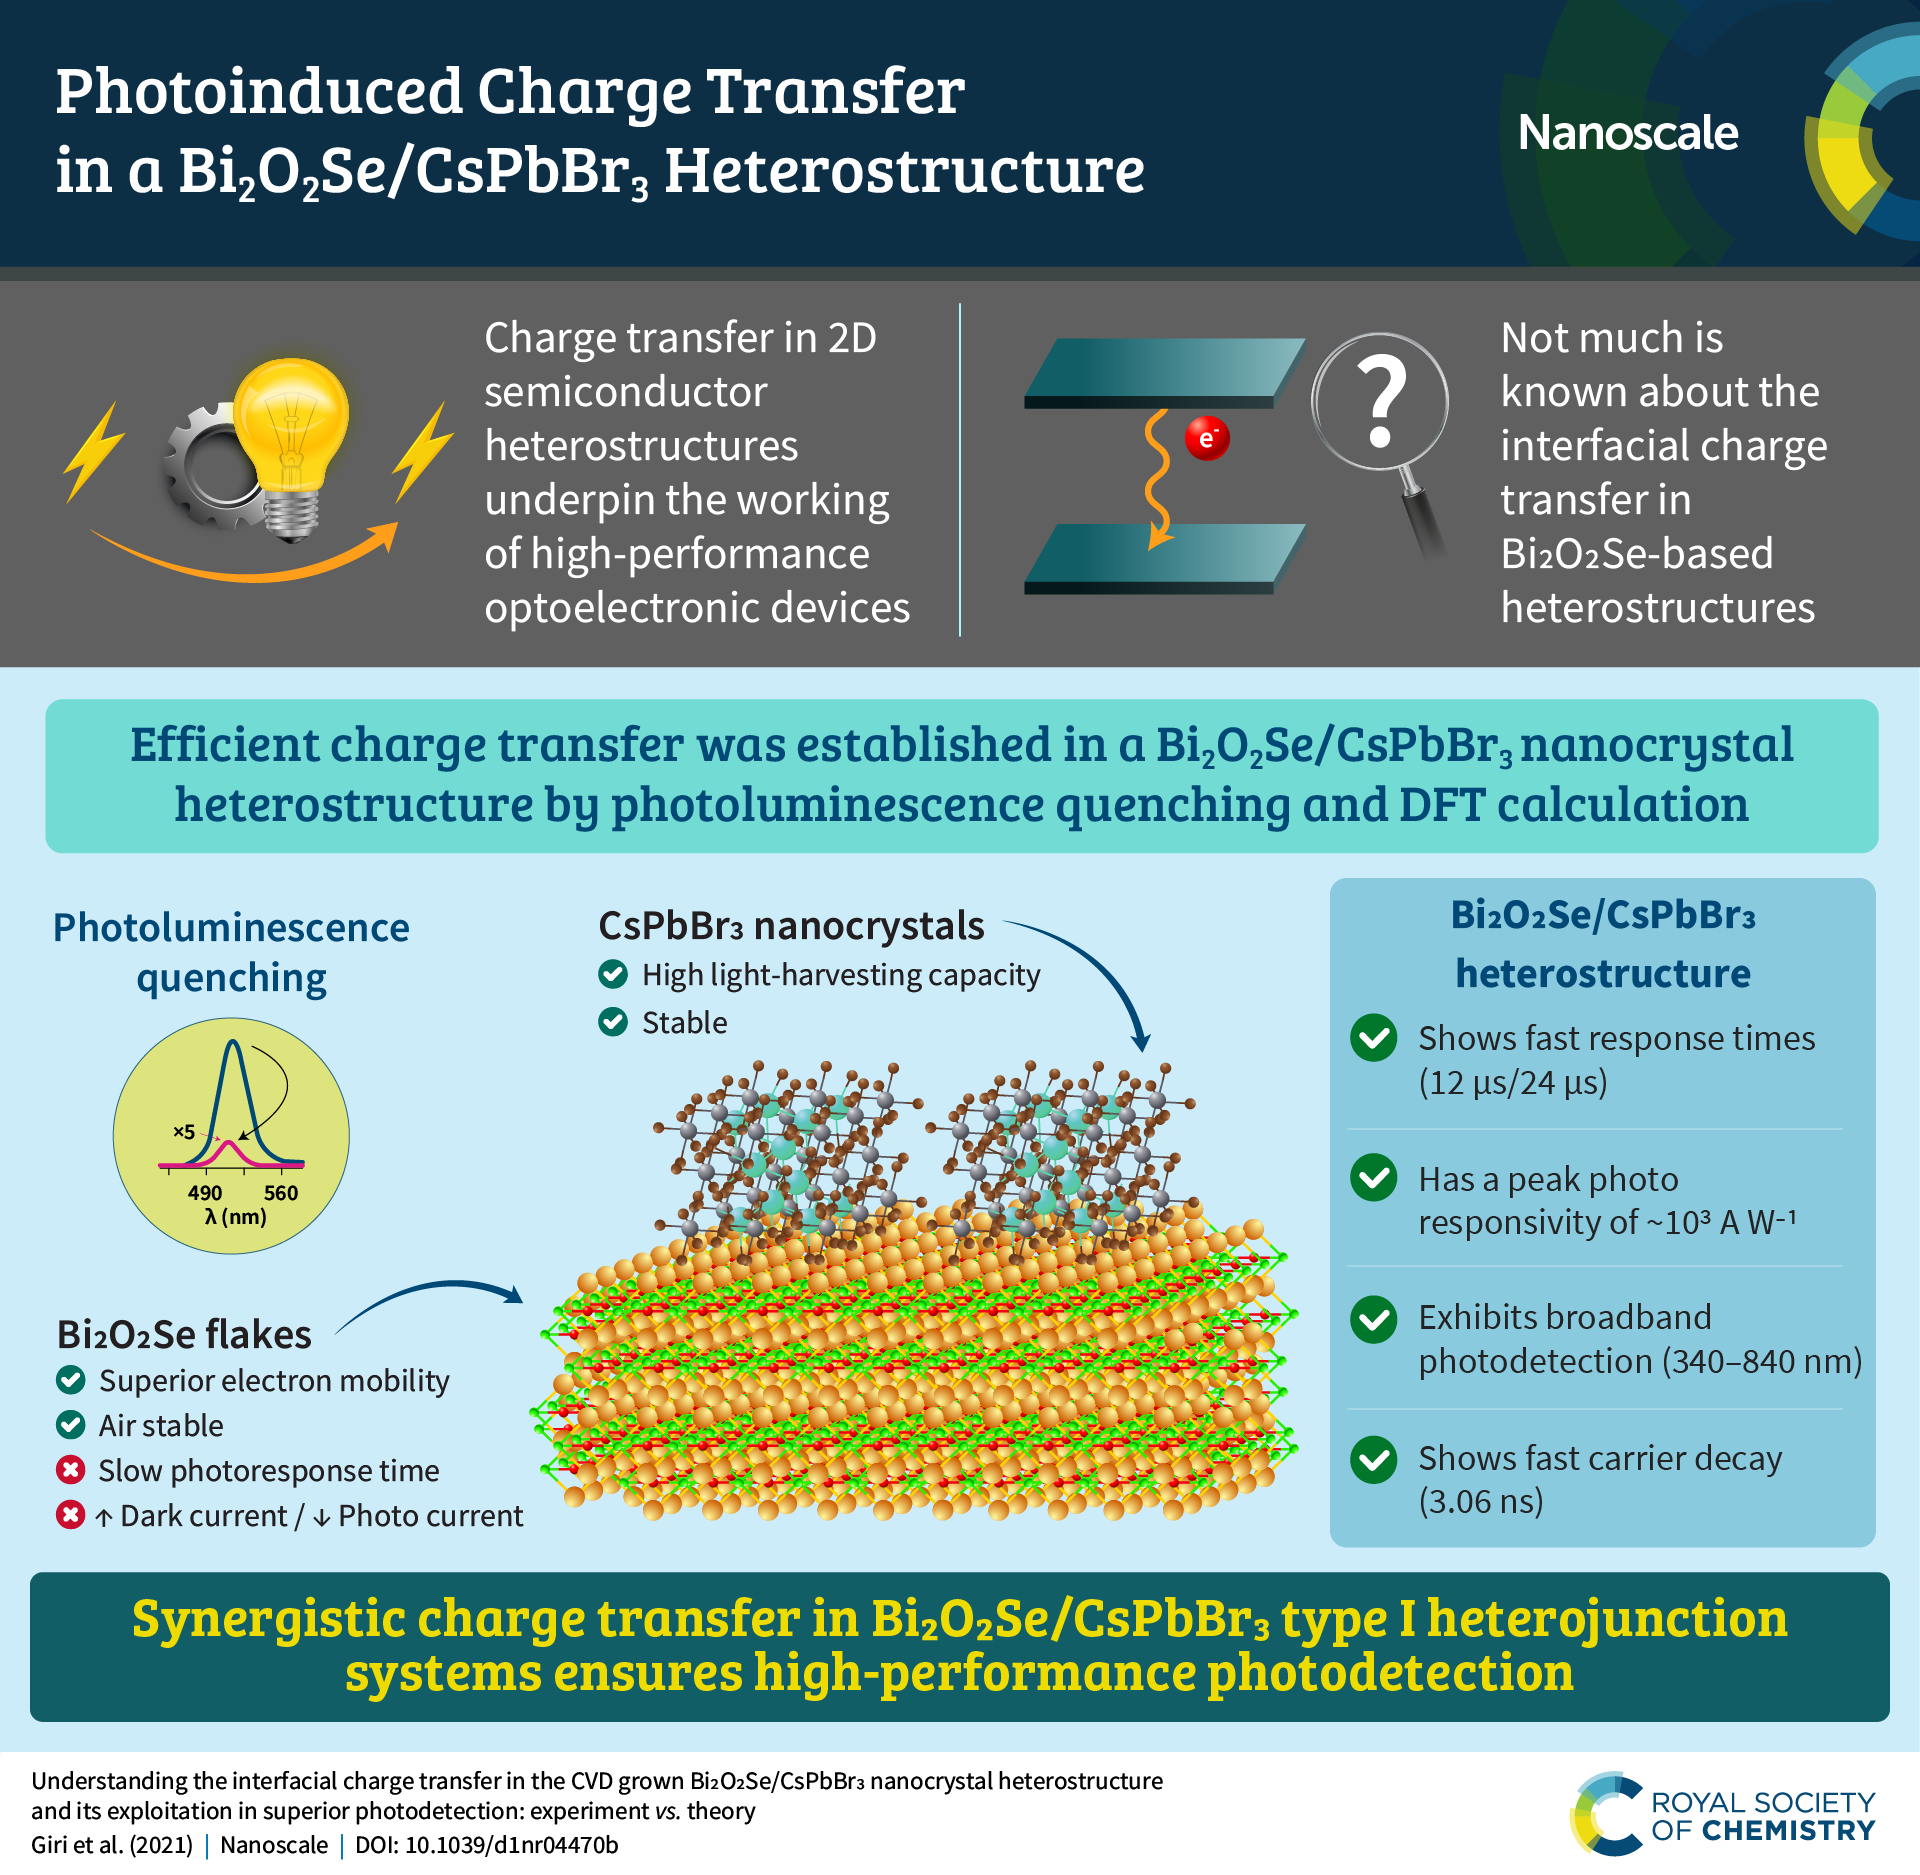 An infographic summarising the content of the article “Understanding the interfacial charge transfer in the CVD grown Bi2O2Se/CsPbBr3 nanocrystal heterostructure and its exploitation in superior photodetection: experiment vs. theory"